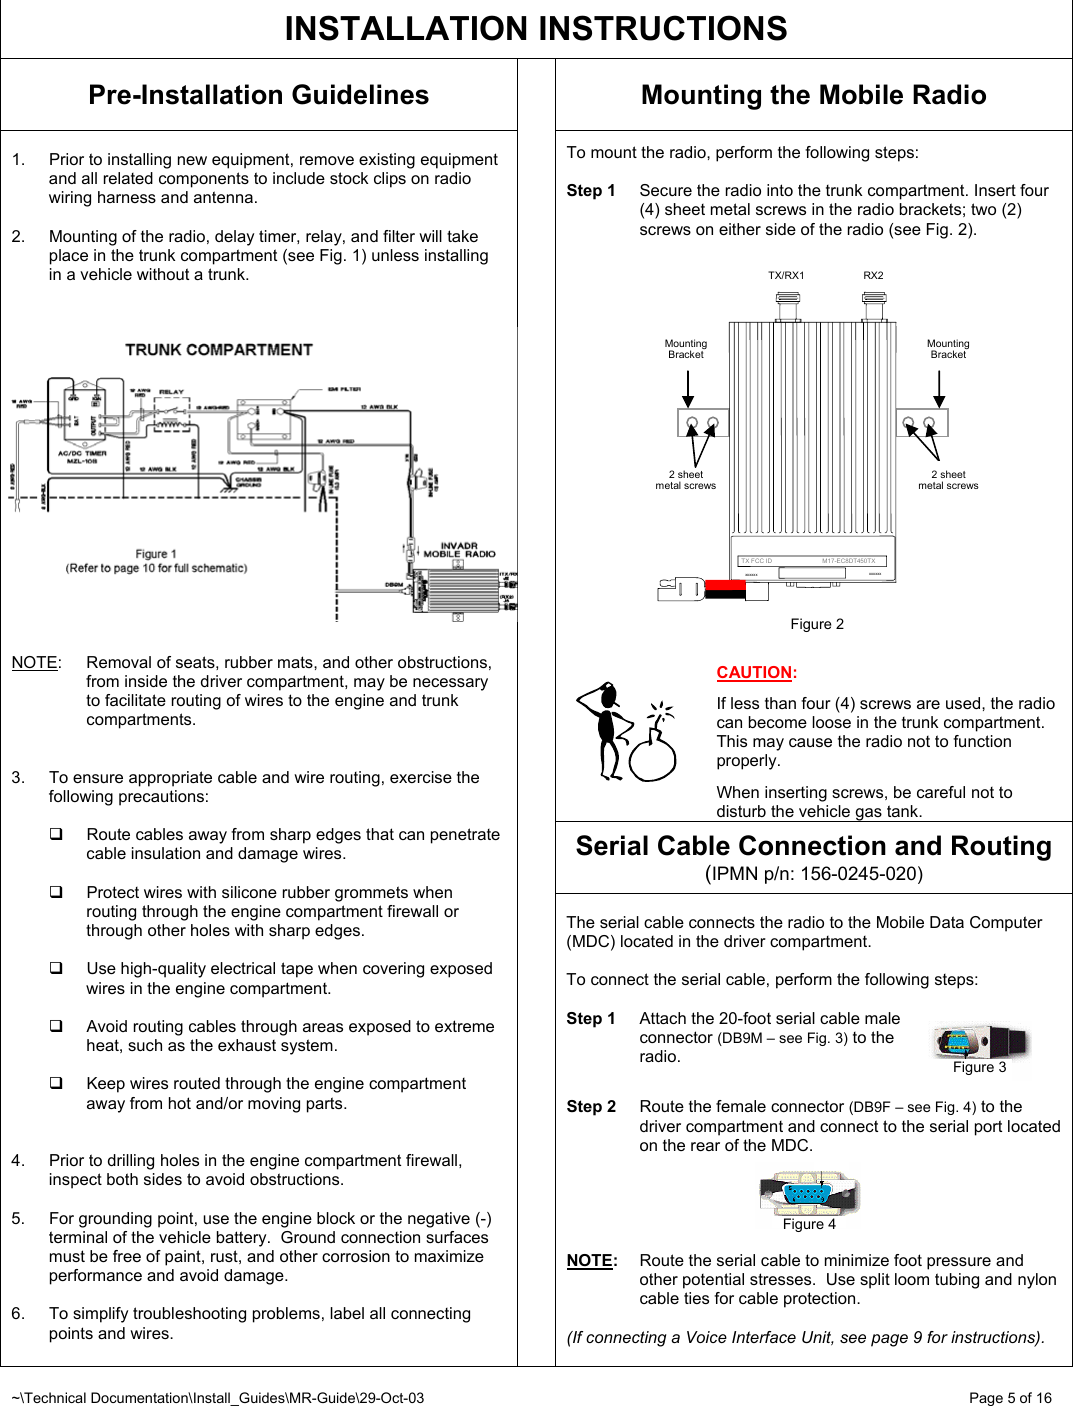 ~\Technical Documentation\Install_Guides\MR-Guide\29-Oct-03   Page 5 of 16 2 sheet metal screws Mounting Bracket  TX/RX1  RX2 Mounting Bracket      TX FCC ID                             M17-EC8DT450TX xxxxxxxxxxxx2 sheet metal screws Figure 2   INSTALLATION INSTRUCTIONS Pre-Installation Guidelines  Mounting the Mobile Radio  To mount the radio, perform the following steps:   Step 1  Secure the radio into the trunk compartment. Insert four (4) sheet metal screws in the radio brackets; two (2) screws on either side of the radio (see Fig. 2).                       CAUTION:  If less than four (4) screws are used, the radio can become loose in the trunk compartment.  This may cause the radio not to function properly.   When inserting screws, be careful not to disturb the vehicle gas tank. Serial Cable Connection and Routing (IPMN p/n: 156-0245-020)  1.  Prior to installing new equipment, remove existing equipment and all related components to include stock clips on radio wiring harness and antenna.  2.  Mounting of the radio, delay timer, relay, and filter will take place in the trunk compartment (see Fig. 1) unless installing in a vehicle without a trunk.     NOTE: Removal of seats, rubber mats, and other obstructions, from inside the driver compartment, may be necessary to facilitate routing of wires to the engine and trunk compartments.   3.  To ensure appropriate cable and wire routing, exercise the following precautions:    Route cables away from sharp edges that can penetrate cable insulation and damage wires.    Protect wires with silicone rubber grommets when routing through the engine compartment firewall or through other holes with sharp edges.   Use high-quality electrical tape when covering exposed wires in the engine compartment.    Avoid routing cables through areas exposed to extreme heat, such as the exhaust system.    Keep wires routed through the engine compartment away from hot and/or moving parts.   4.  Prior to drilling holes in the engine compartment firewall, inspect both sides to avoid obstructions.  5.  For grounding point, use the engine block or the negative (-) terminal of the vehicle battery.  Ground connection surfaces must be free of paint, rust, and other corrosion to maximize performance and avoid damage.  6.  To simplify troubleshooting problems, label all connecting points and wires.     The serial cable connects the radio to the Mobile Data Computer (MDC) located in the driver compartment.  To connect the serial cable, perform the following steps:  Step 1  Attach the 20-foot serial cable male  connector (DB9M – see Fig. 3) to the  radio.   Step 2  Route the female connector (DB9F – see Fig. 4) to the driver compartment and connect to the serial port located on the rear of the MDC.      NOTE:  Route the serial cable to minimize foot pressure and other potential stresses.  Use split loom tubing and nylon cable ties for cable protection.   (If connecting a Voice Interface Unit, see page 9 for instructions).  Figure 3 Figure 4 